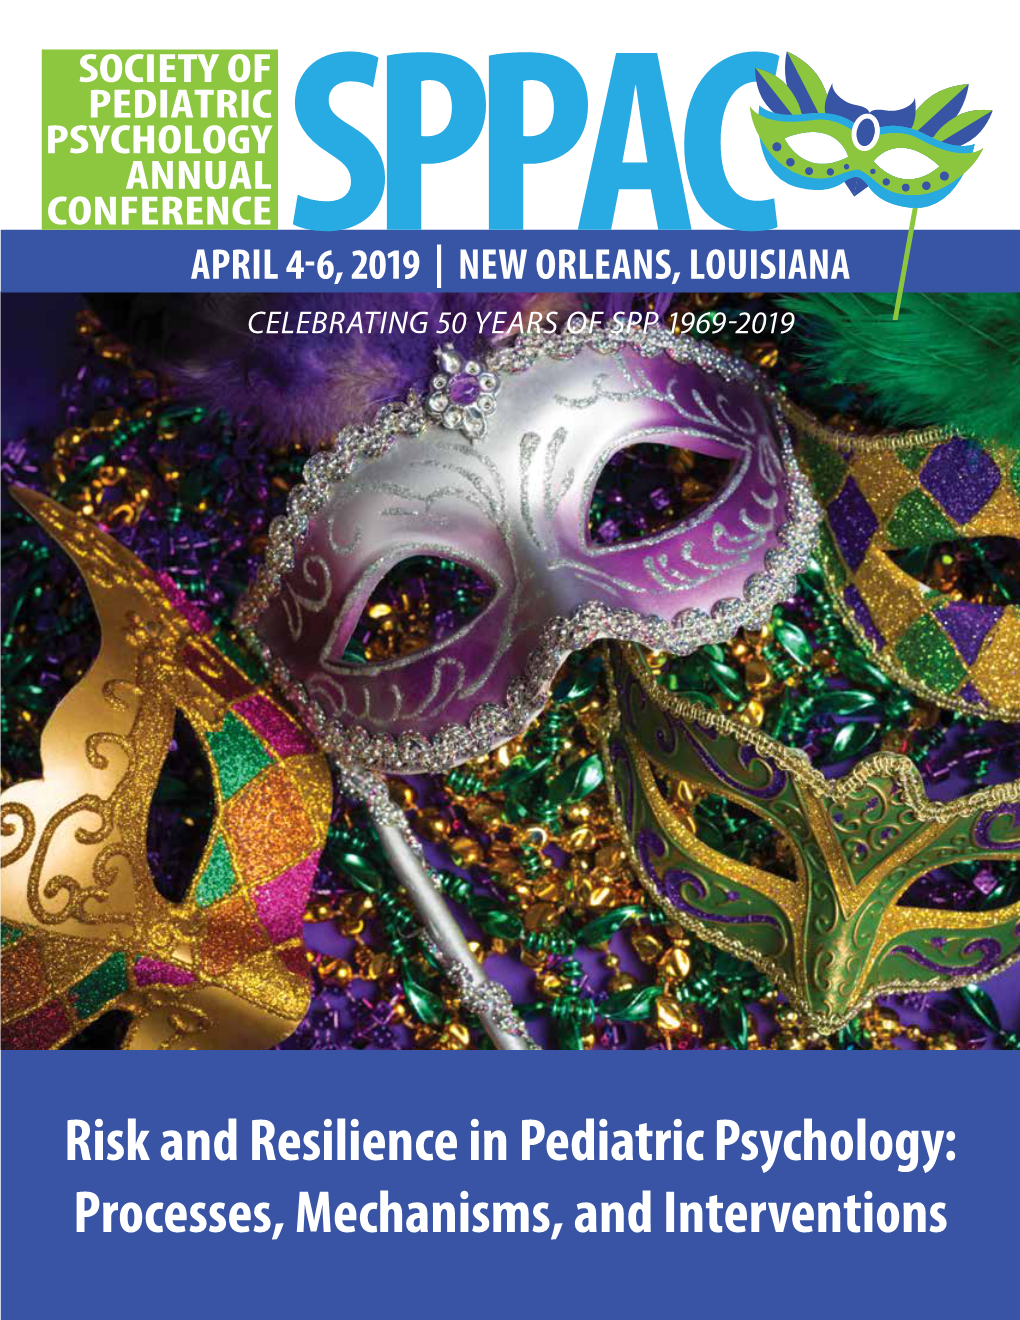 Processes, Mechanisms, and Interventions WELCOME to the 2019 SOCIETY of PEDIATRIC PSYCHOLOGY ANNUAL CONFERENCE